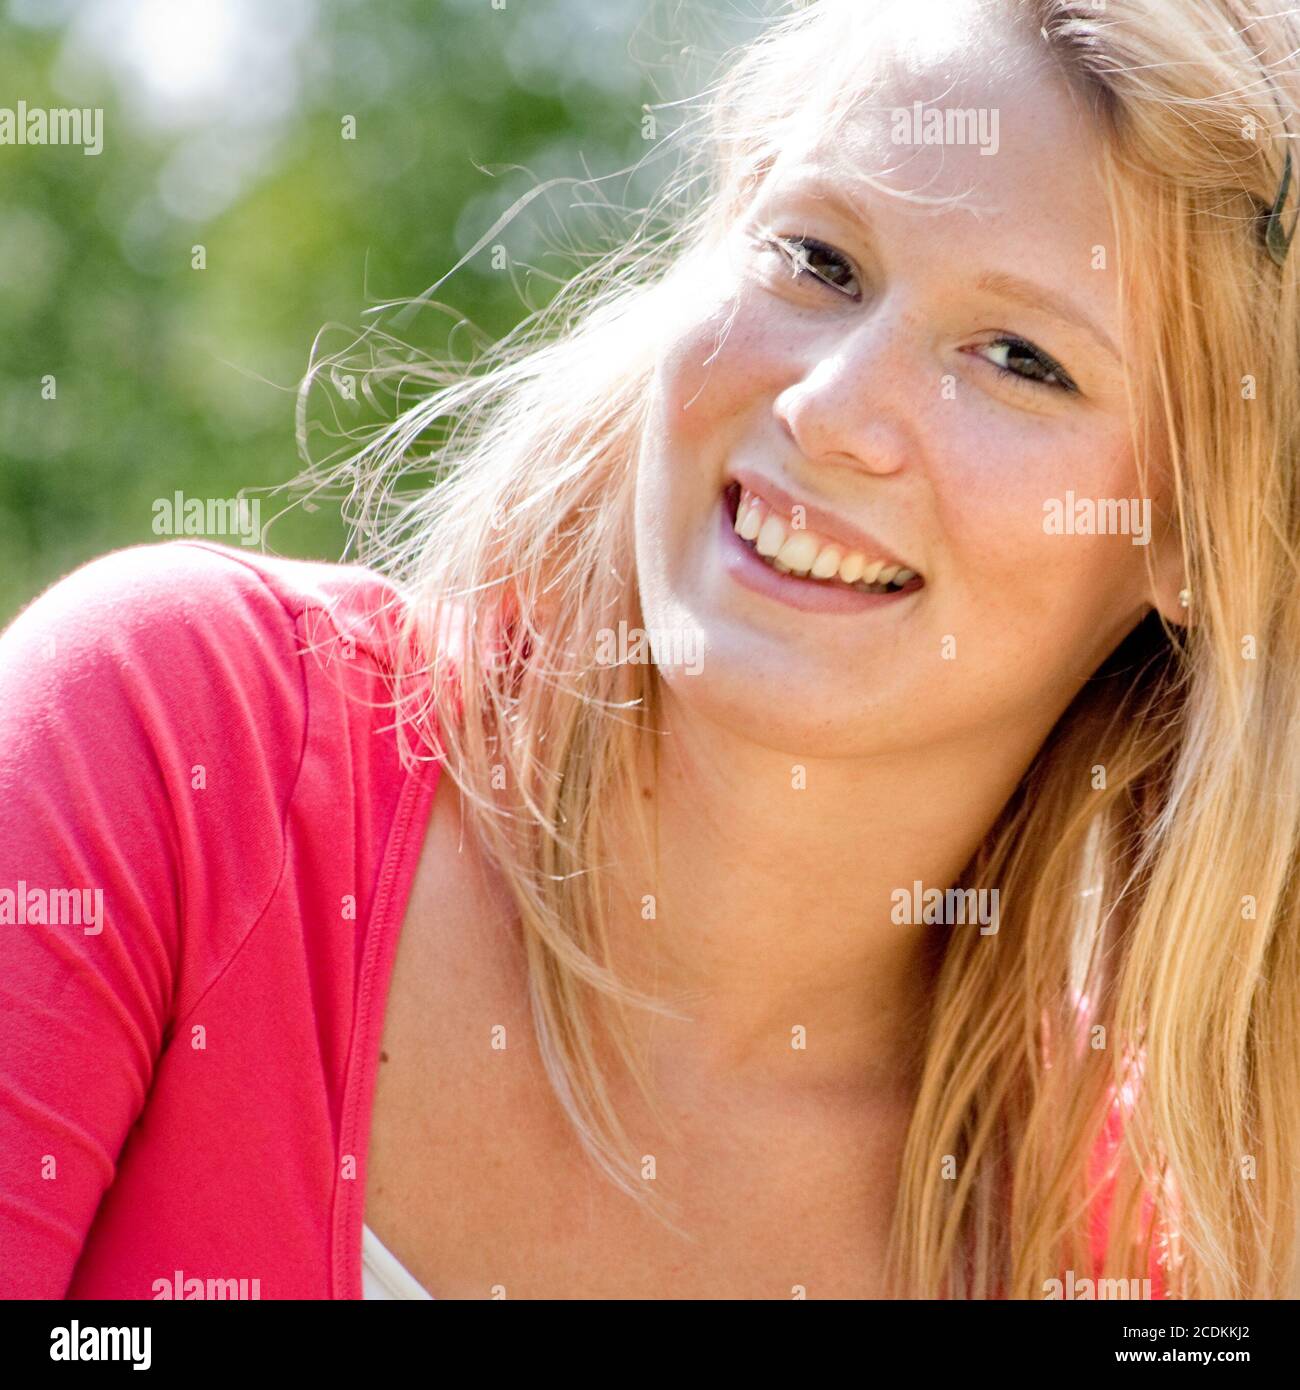 A blond woman in the park with sunny weather Stock Photo